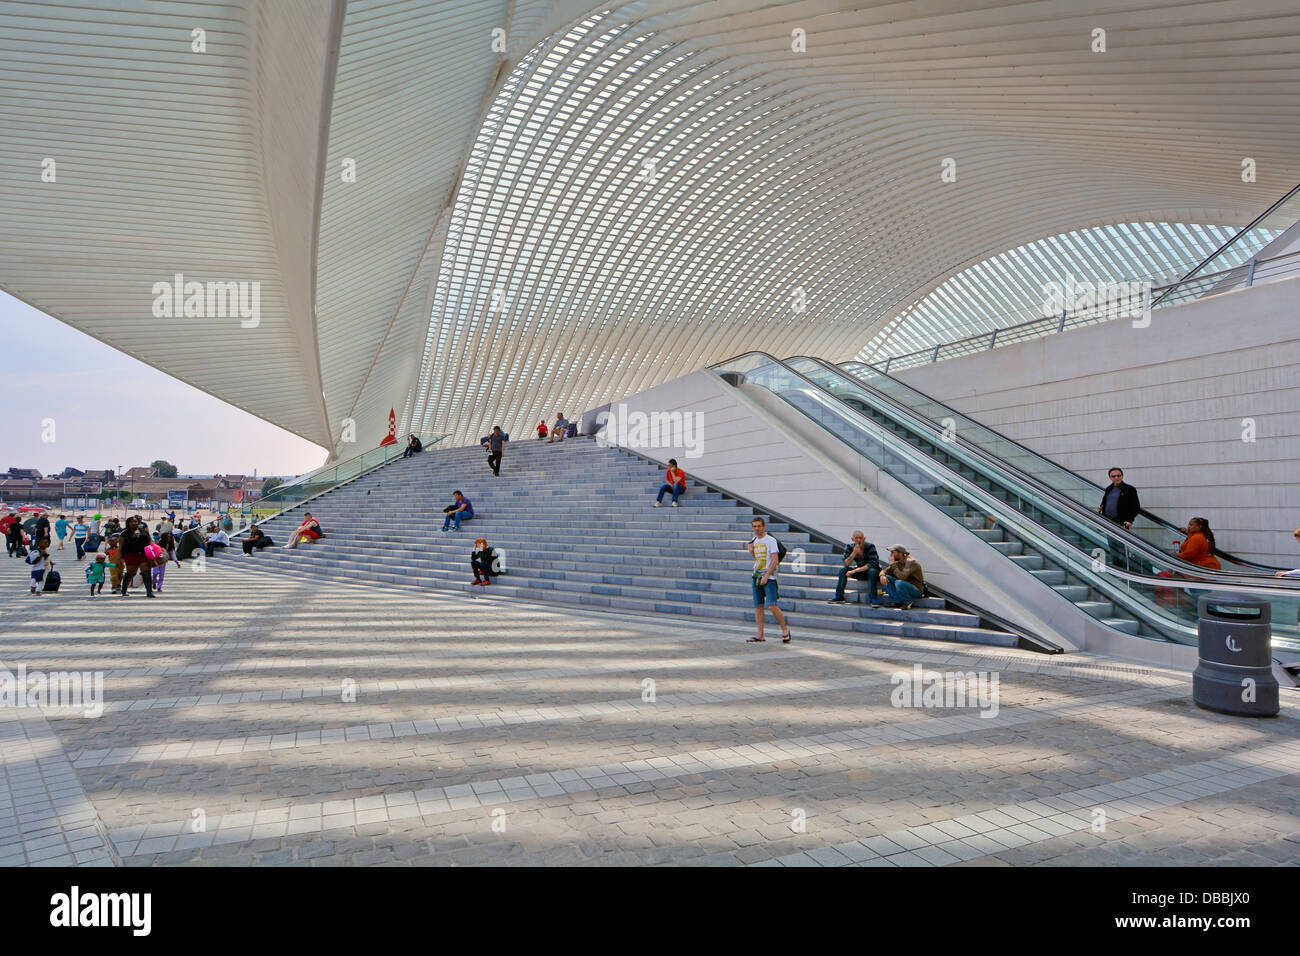 Futuristic glass roof of exterior modern building architecture to Liege train station entrance steps & escalator covered by glass ceiling belgium, EU Stock Photo